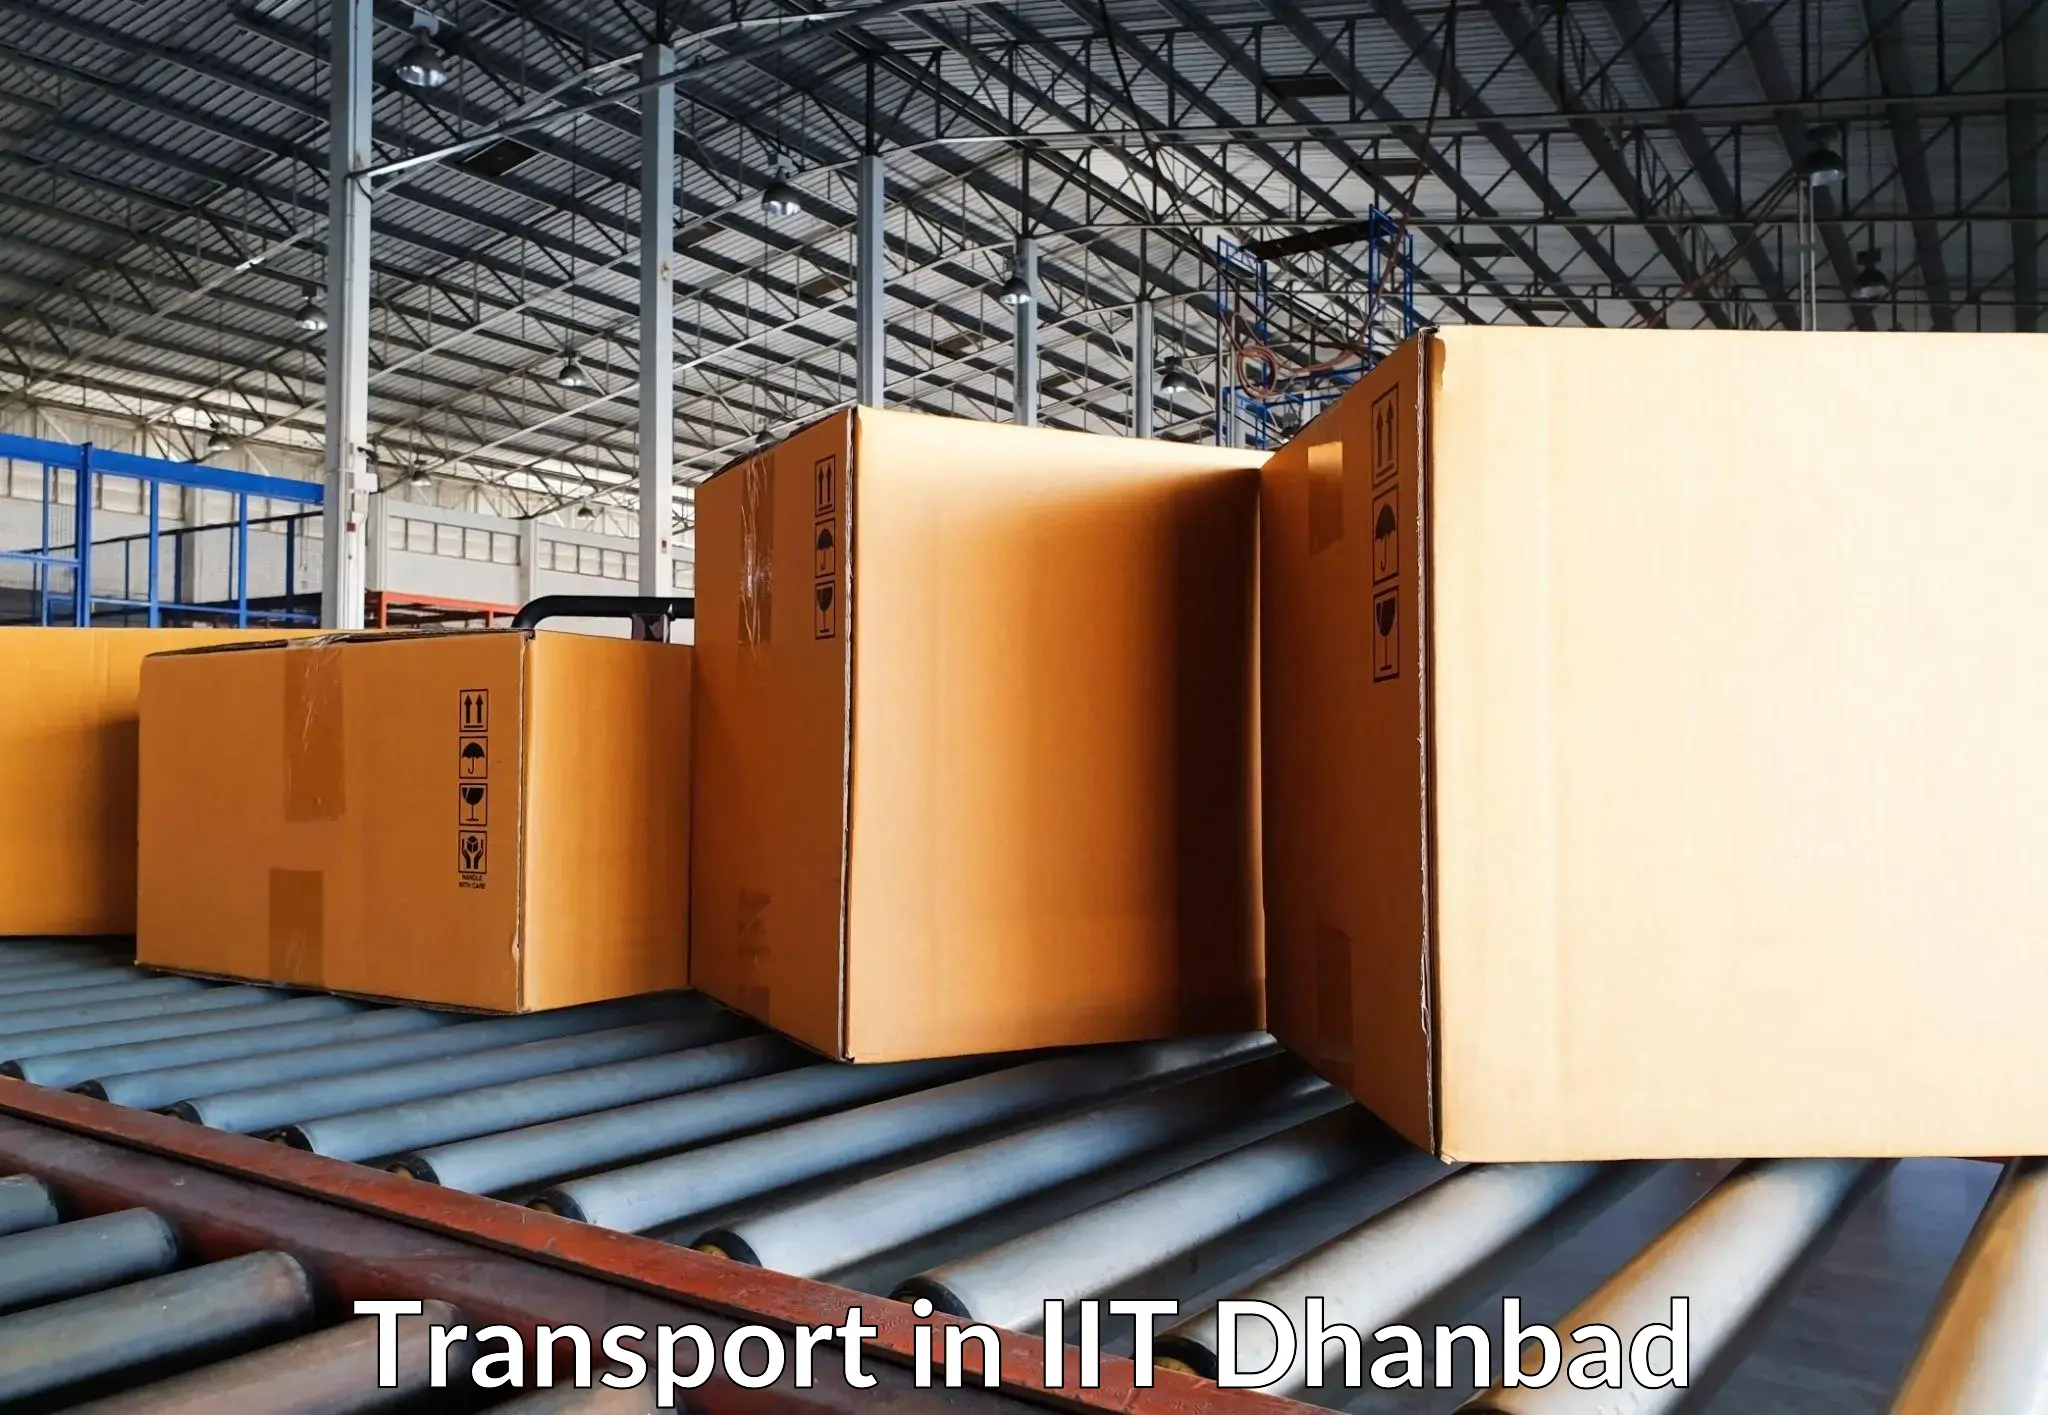 Shipping services in IIT Dhanbad